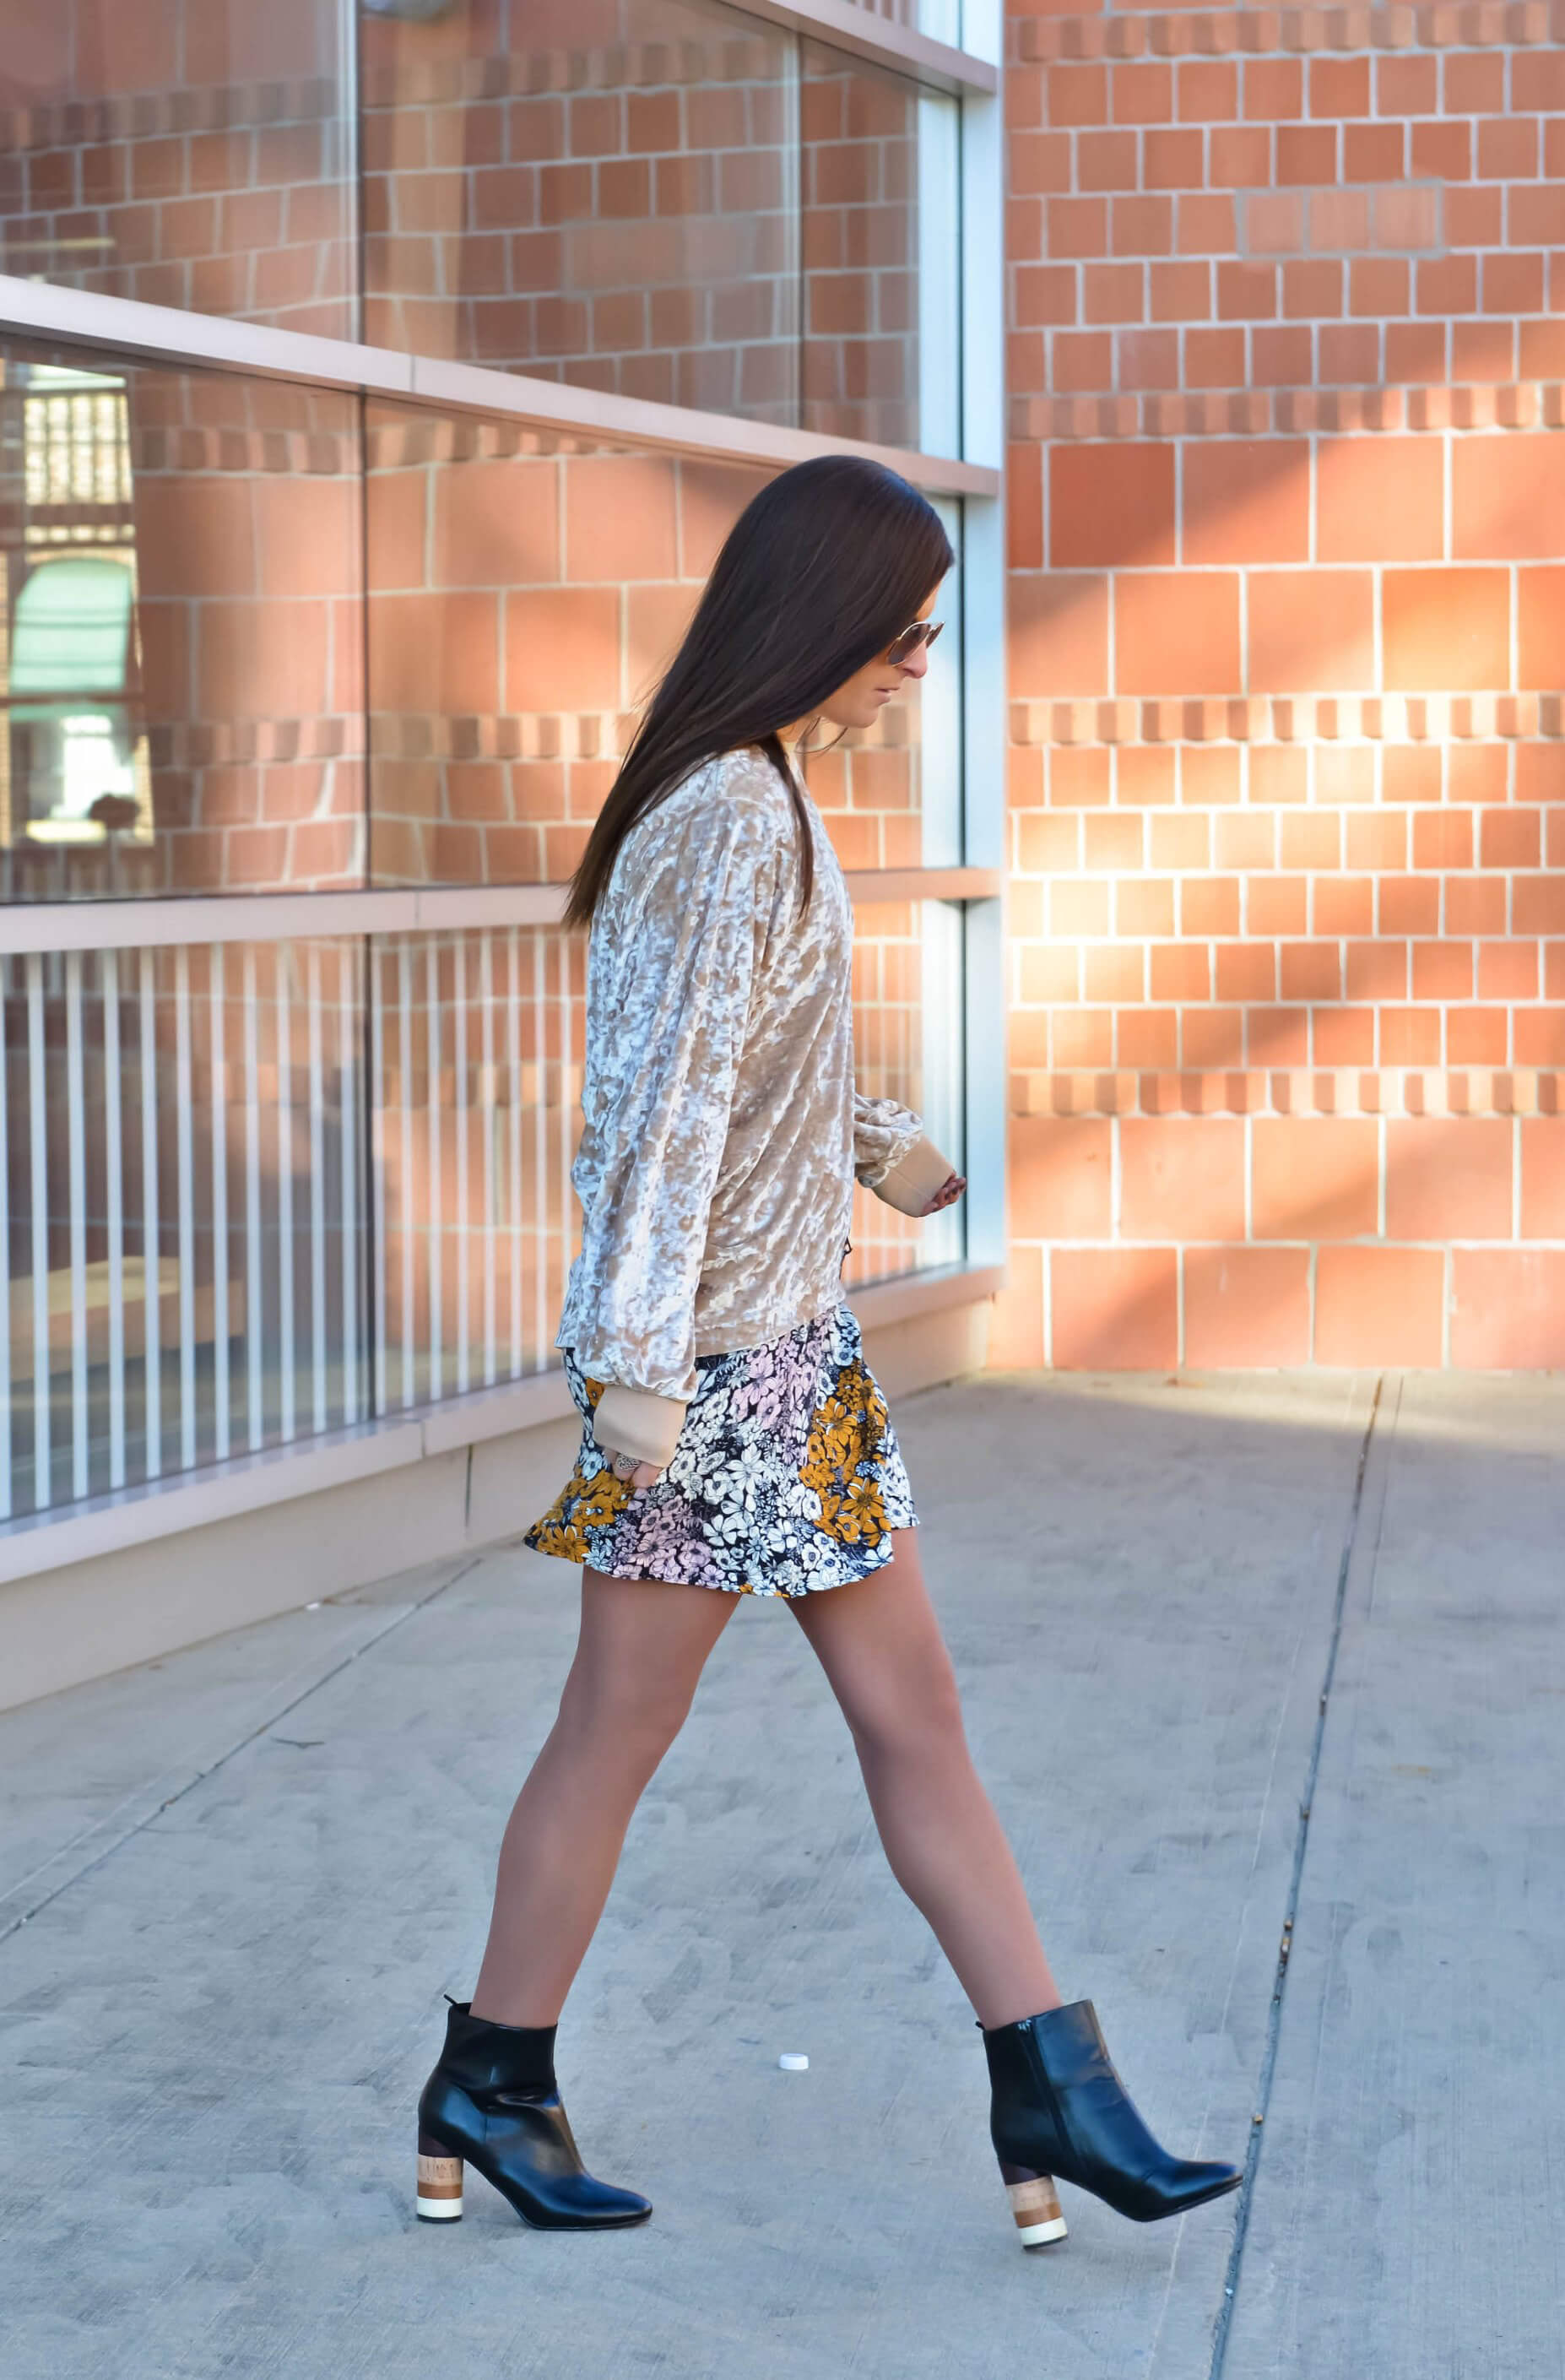 To Be Bright by Tilden Brighton - Fall Outfit, Velvet & Florals